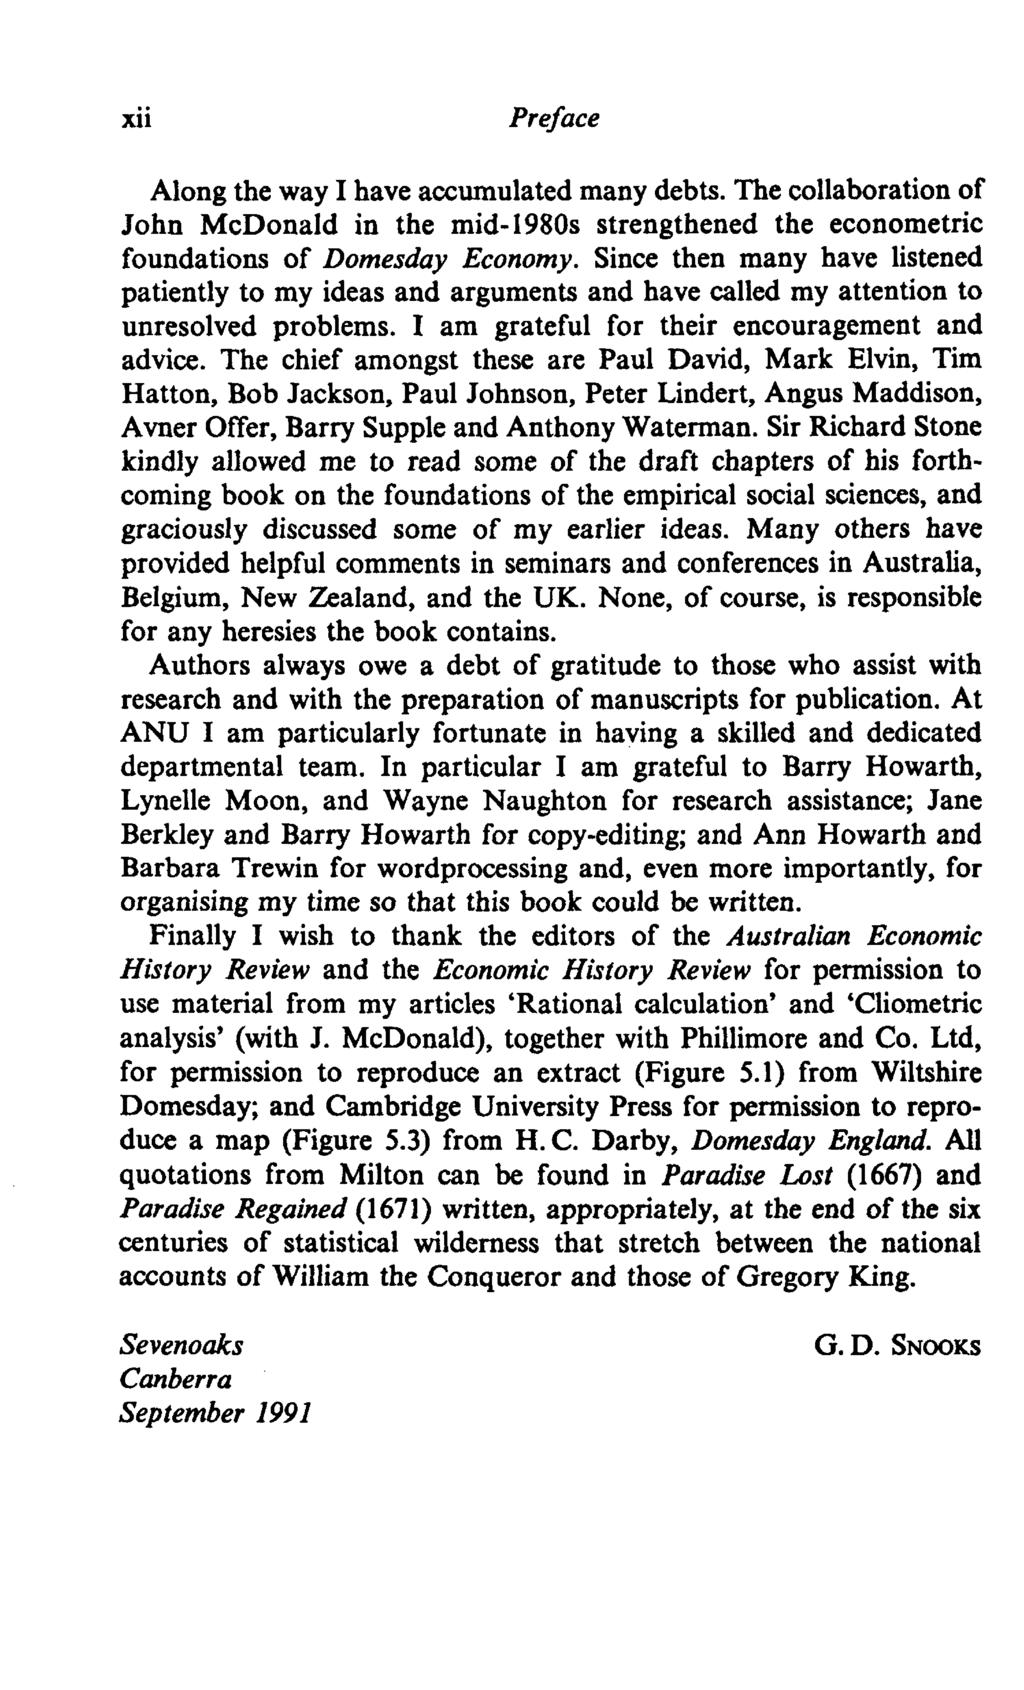 xii Preface Along the way I have accumulated many debts. The collaboration of John McDonald in the mid-1980s strengthened the econometric foundations of Domesday Economy.